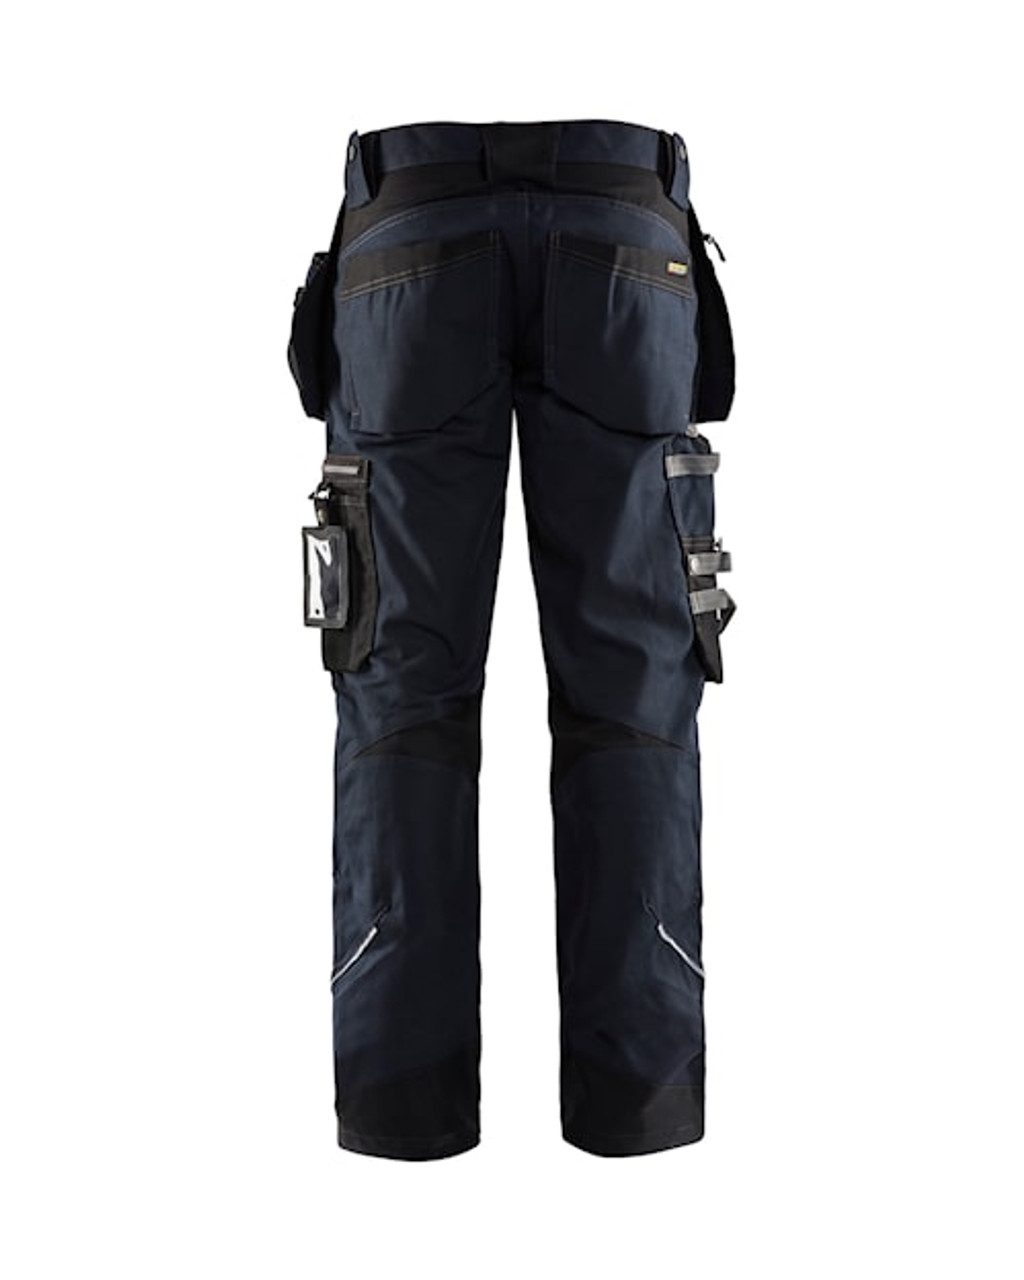 BLAKLADER Work Pants  | Buy online Trousers 1590 for Work Trousers and Work Pants with Holster Pockets in Melbourne, Hobart and Sydney